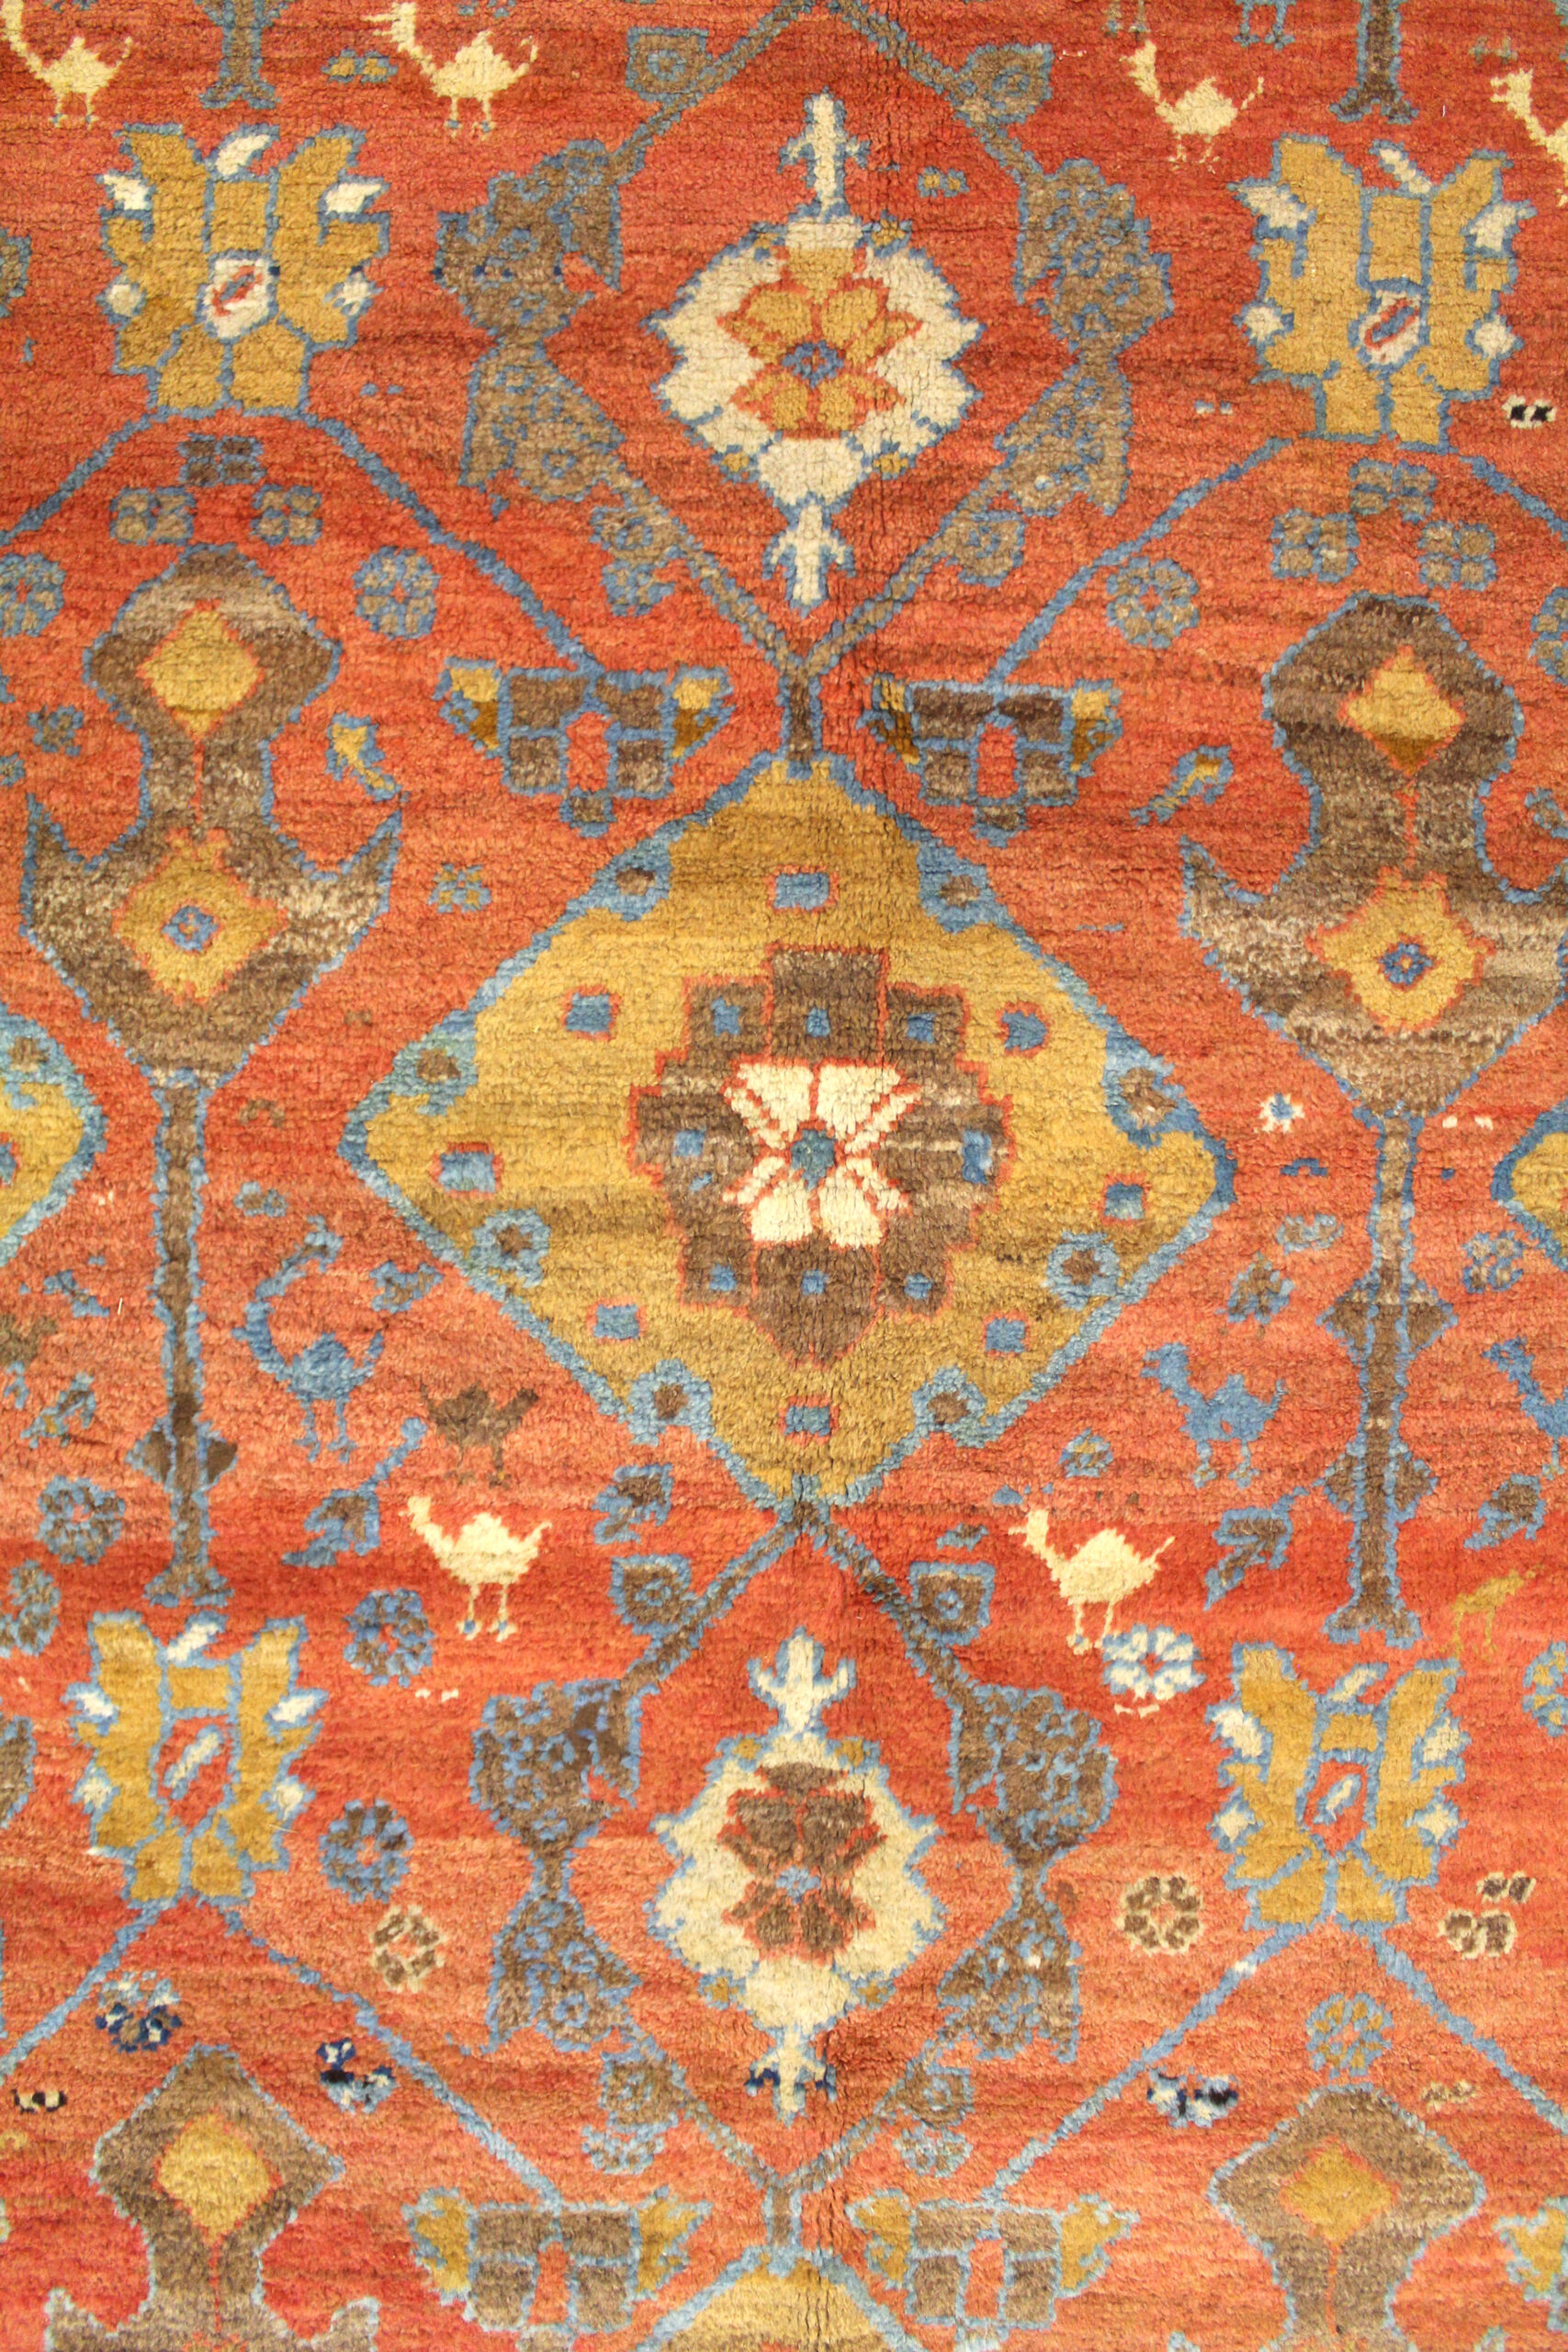 Field detail from an antique Persian Bakshaish carpet with camel color medallions on a salmon color field - Douglas Stock Gallery antique rugs South Natick, Wellesley, Newton, Brookline, Boston,MA area, antique persian carpets New England